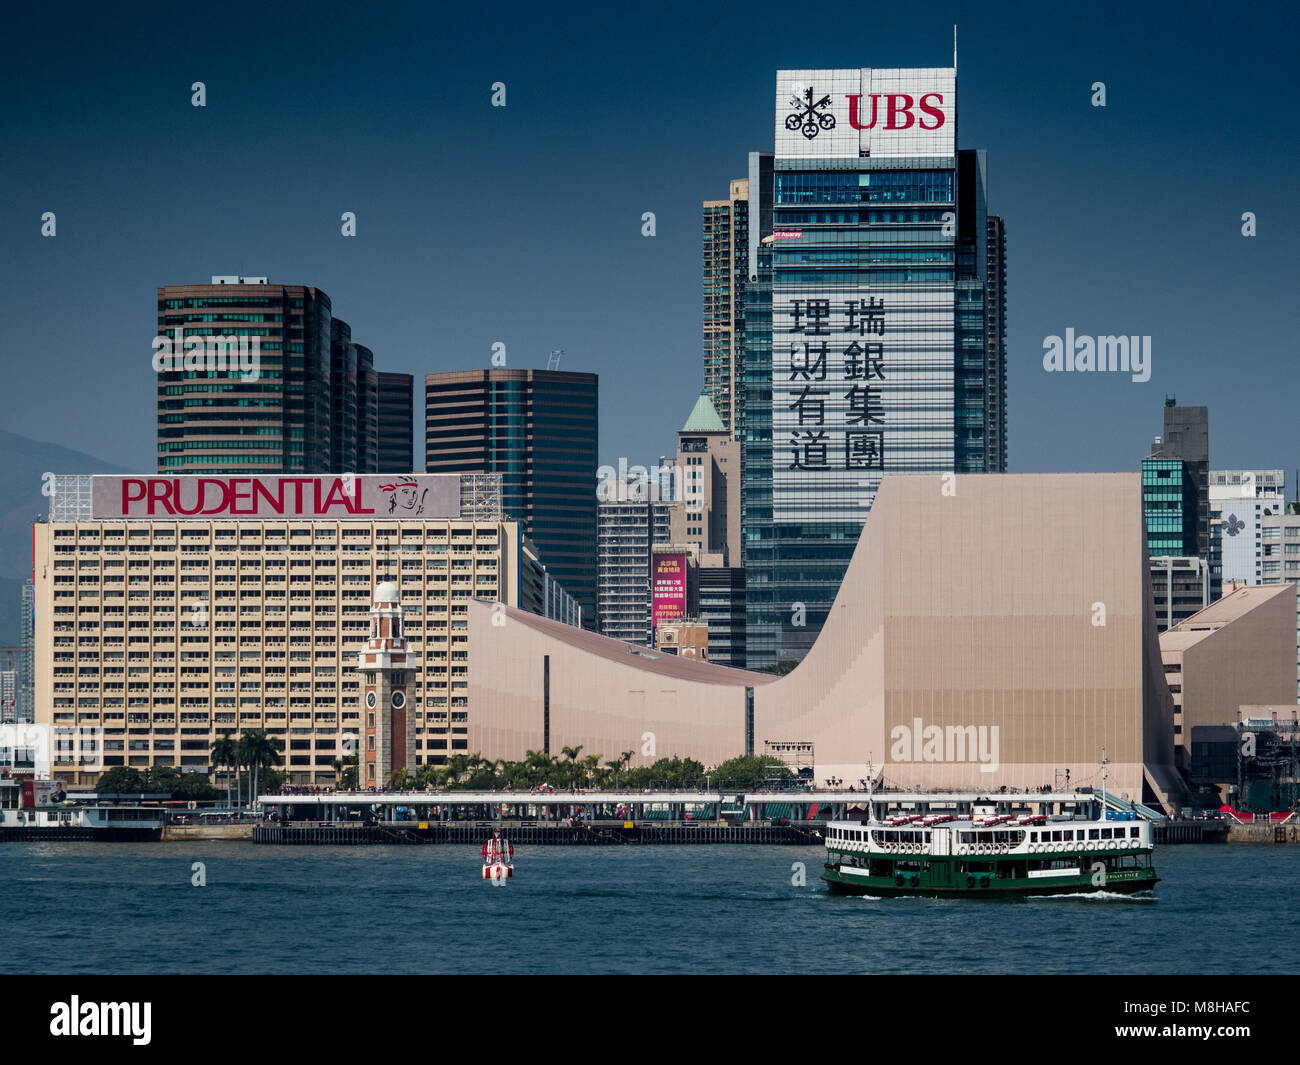 Hong Kong - Star Ferry sails in front of large UBS and Prudential adverts on the Kowloon side of Victoria Harbour Stock Photo